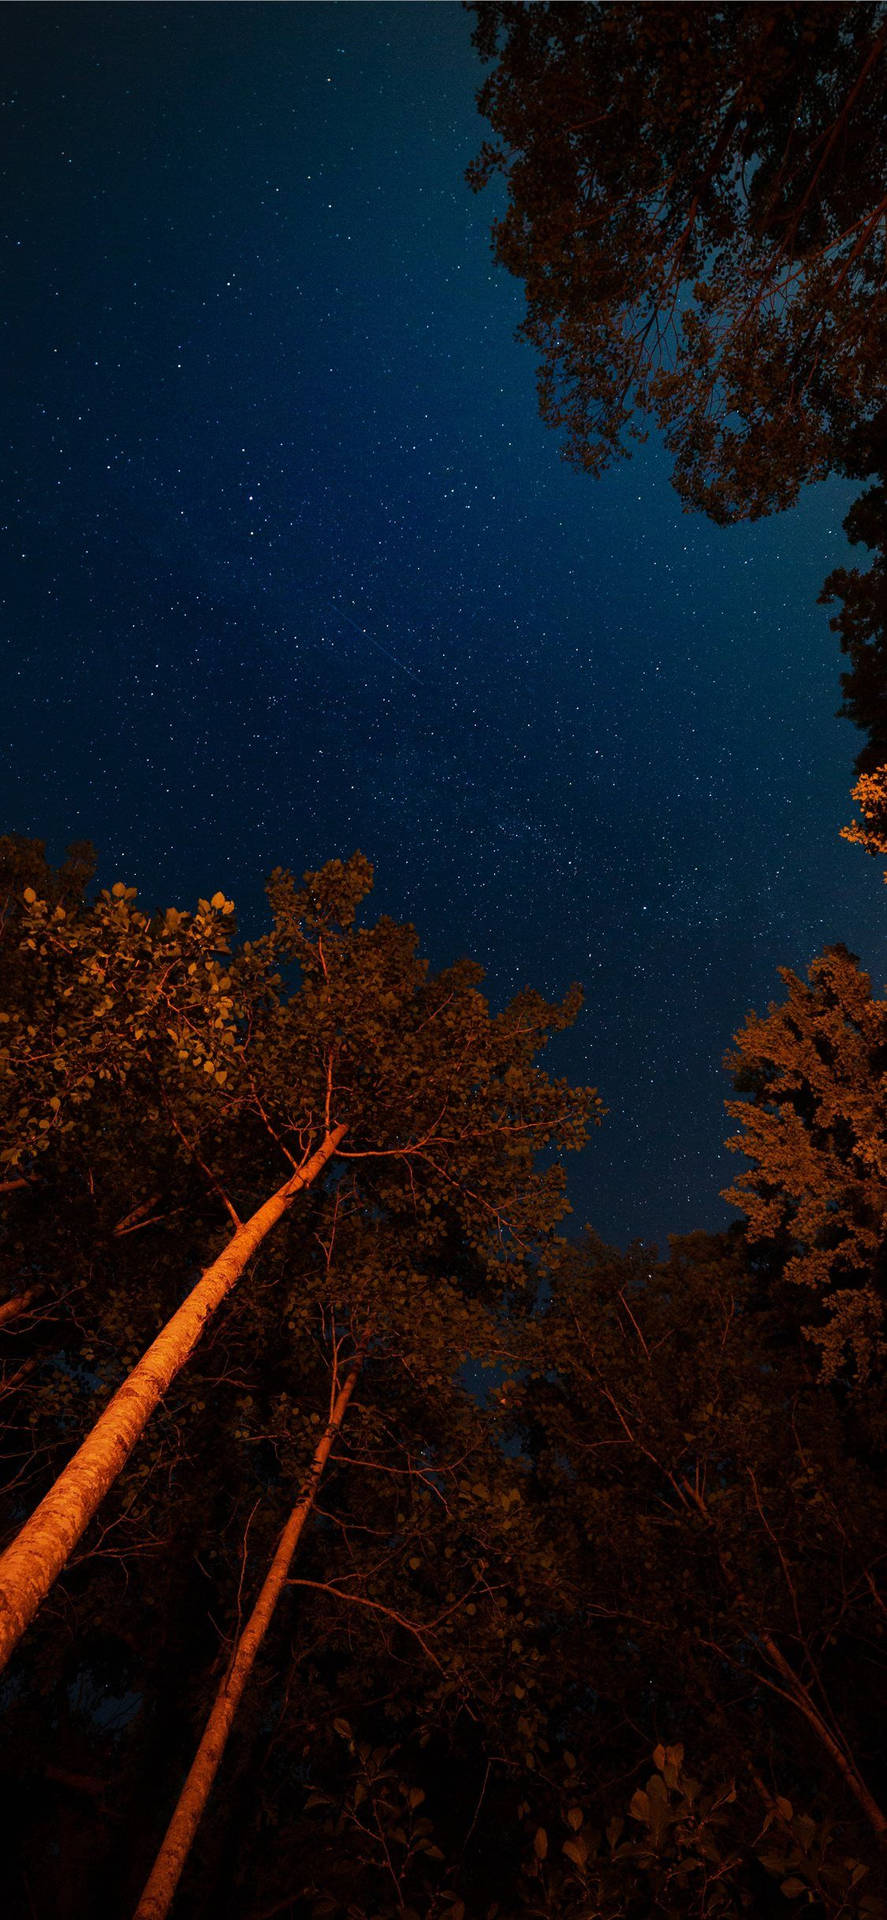 Enjoying the tranquil beauty of a forest night sky with the iPhone 11 Wallpaper